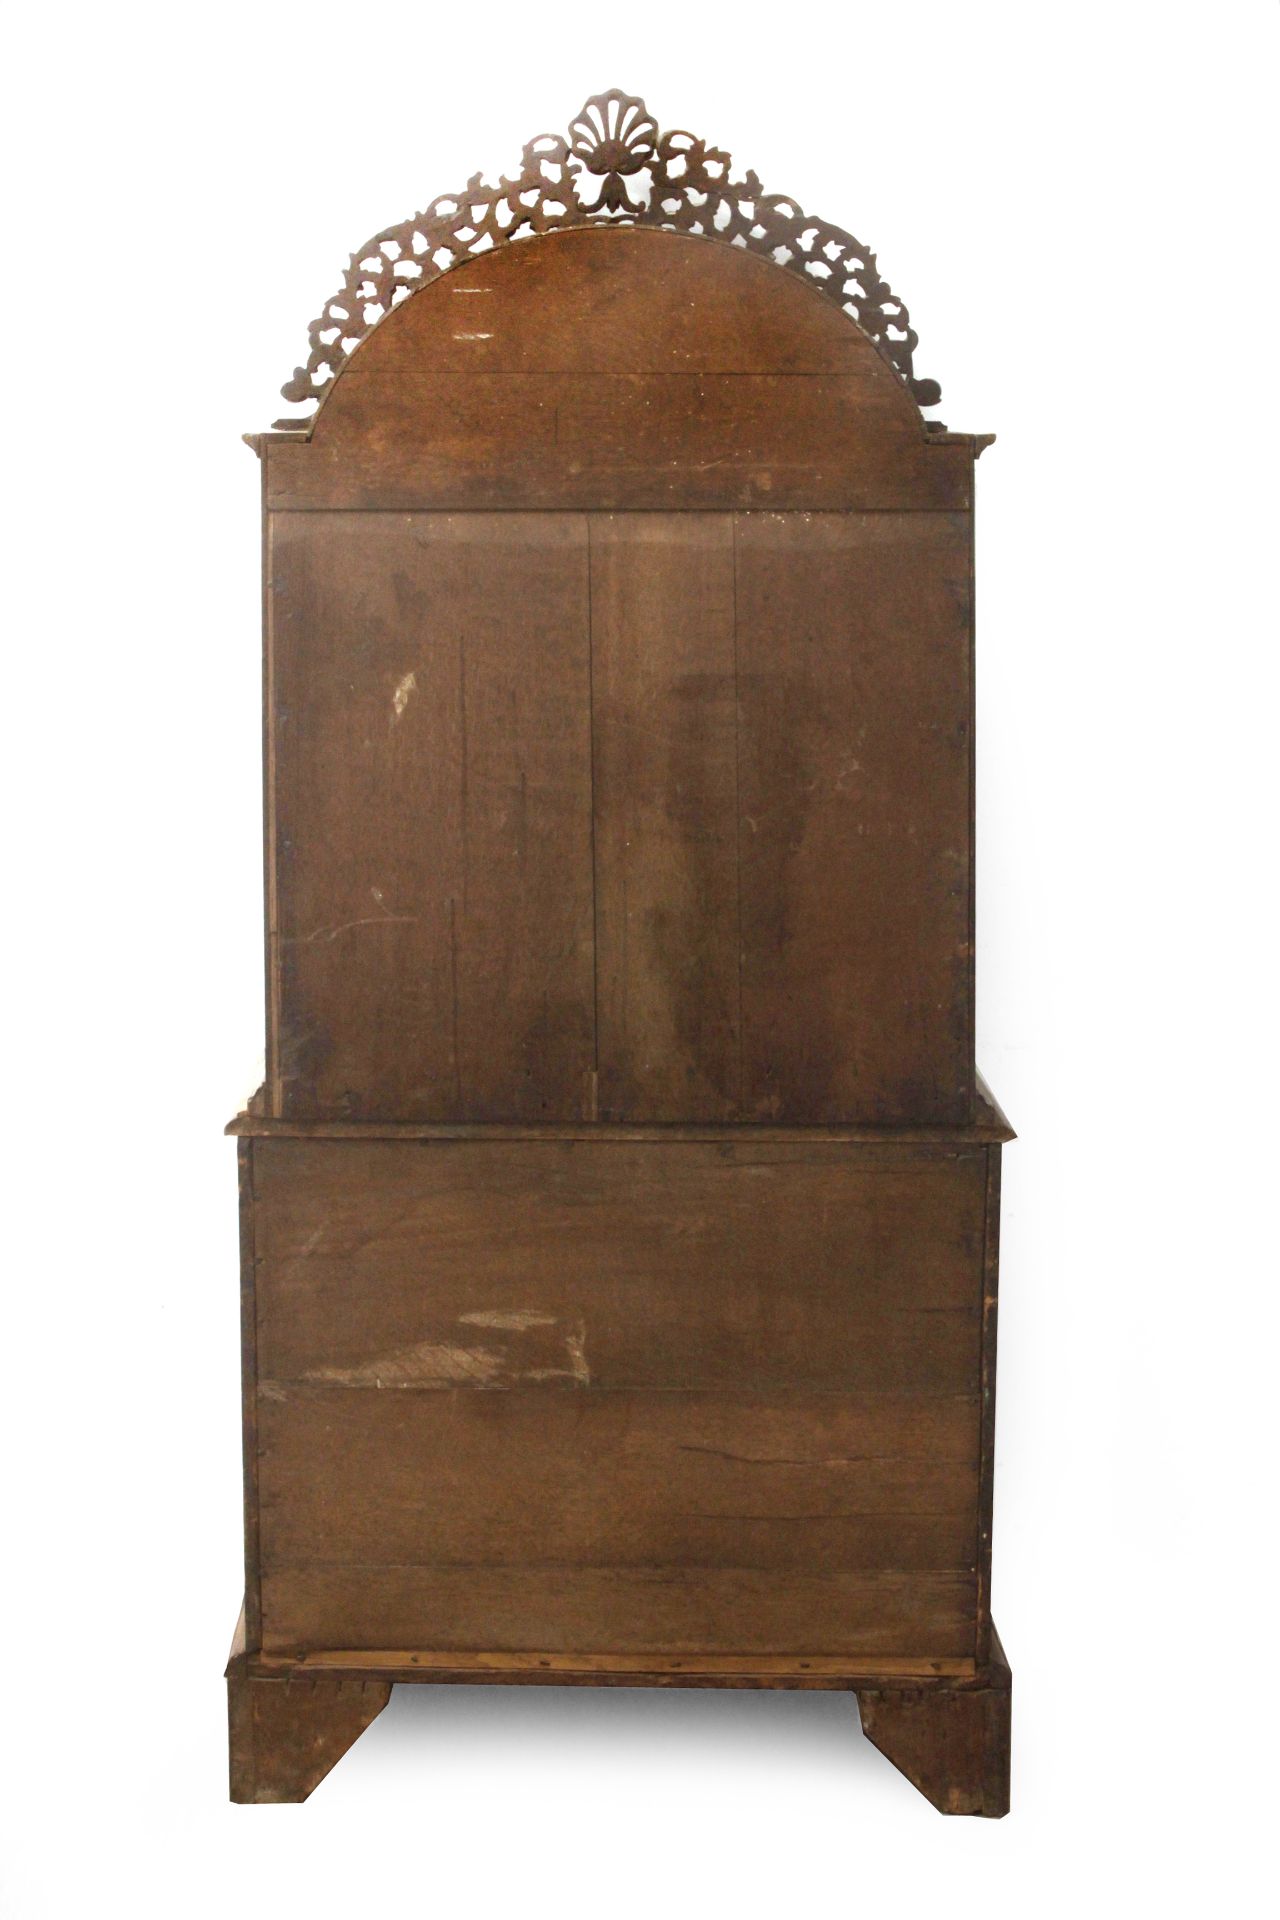 An 18th century Dutch mahogany glass cabinet - Image 5 of 5